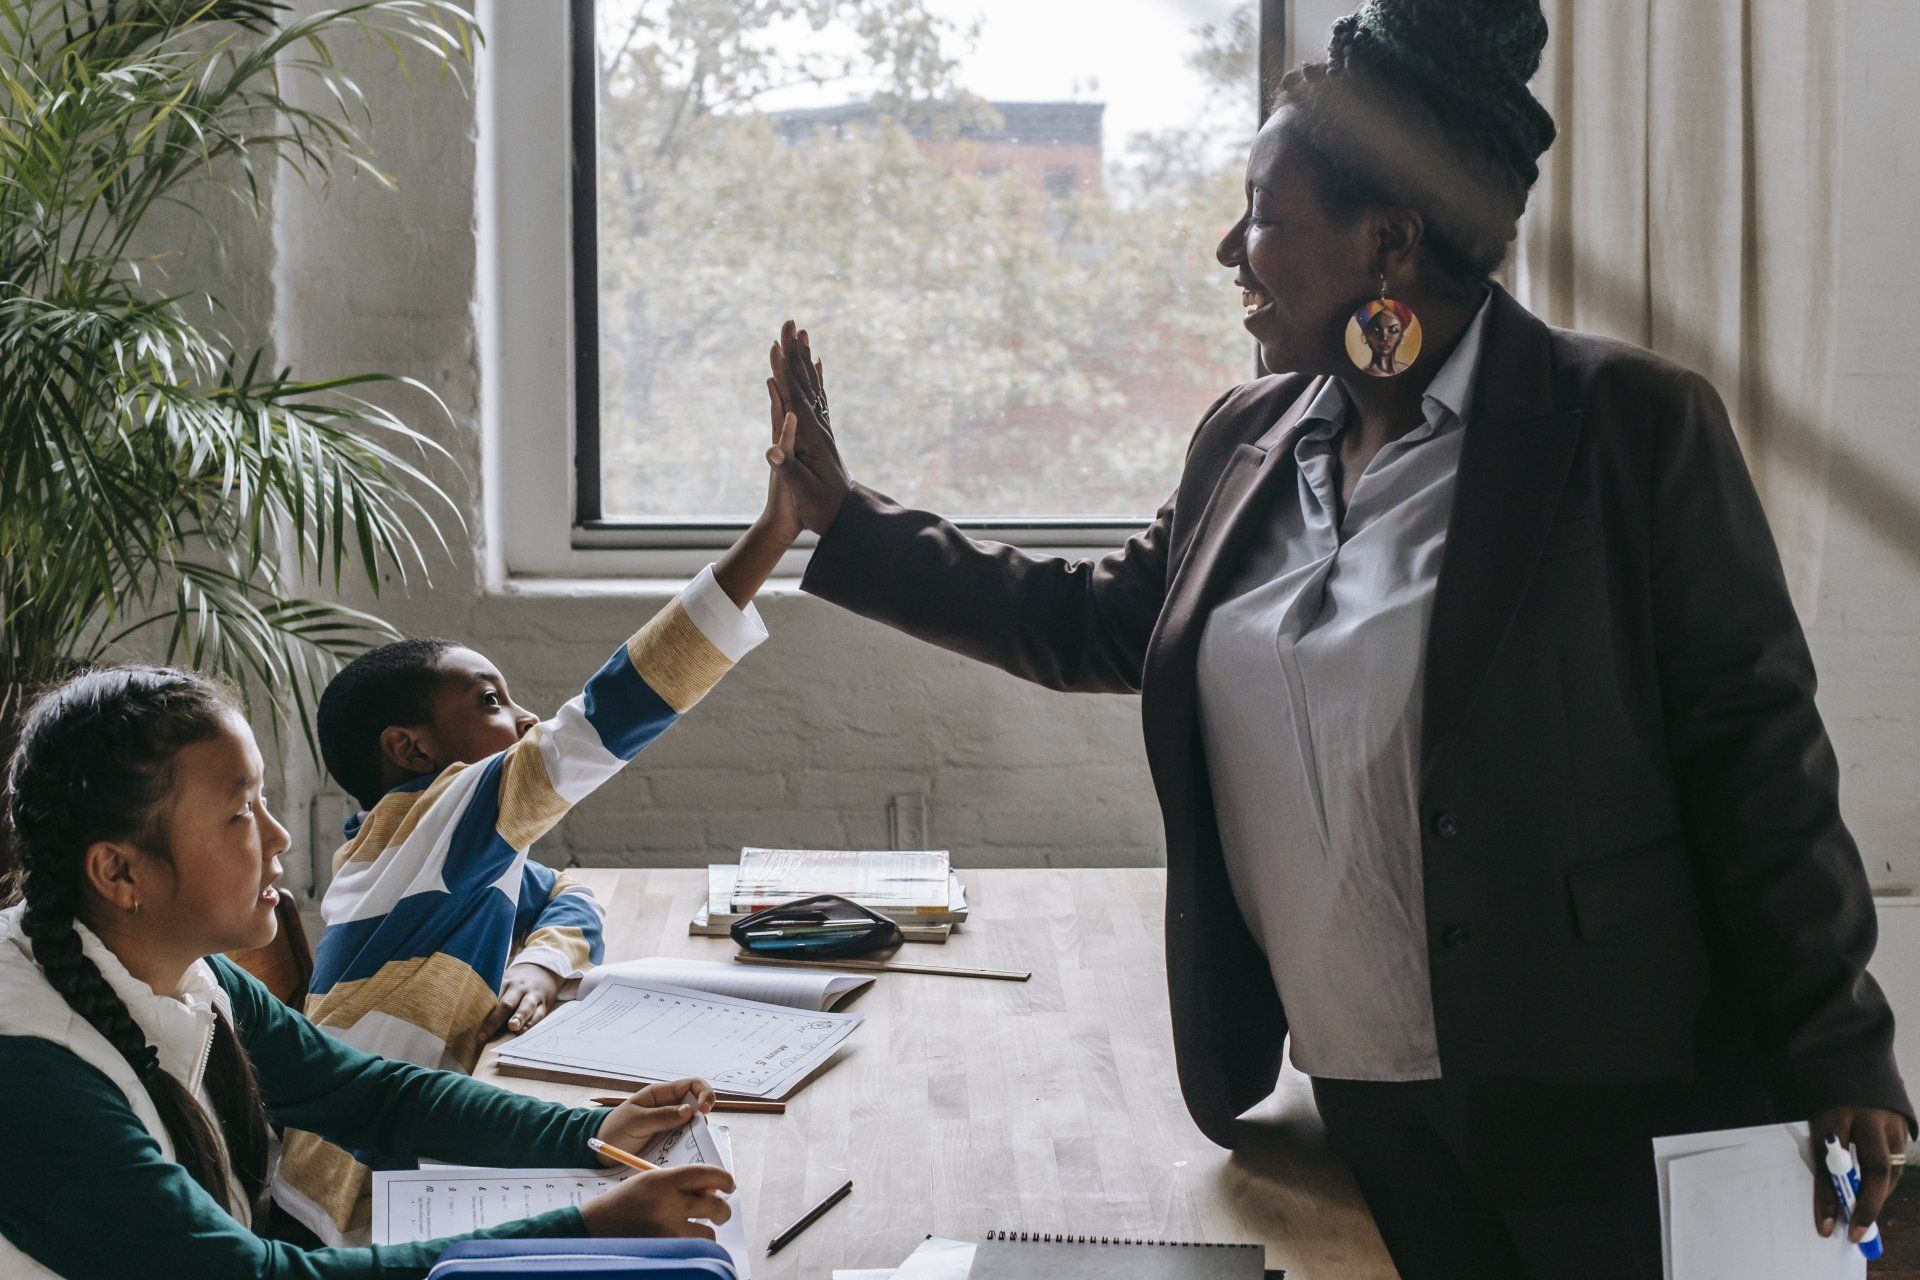 A woman is giving a child a high five in a classroom.